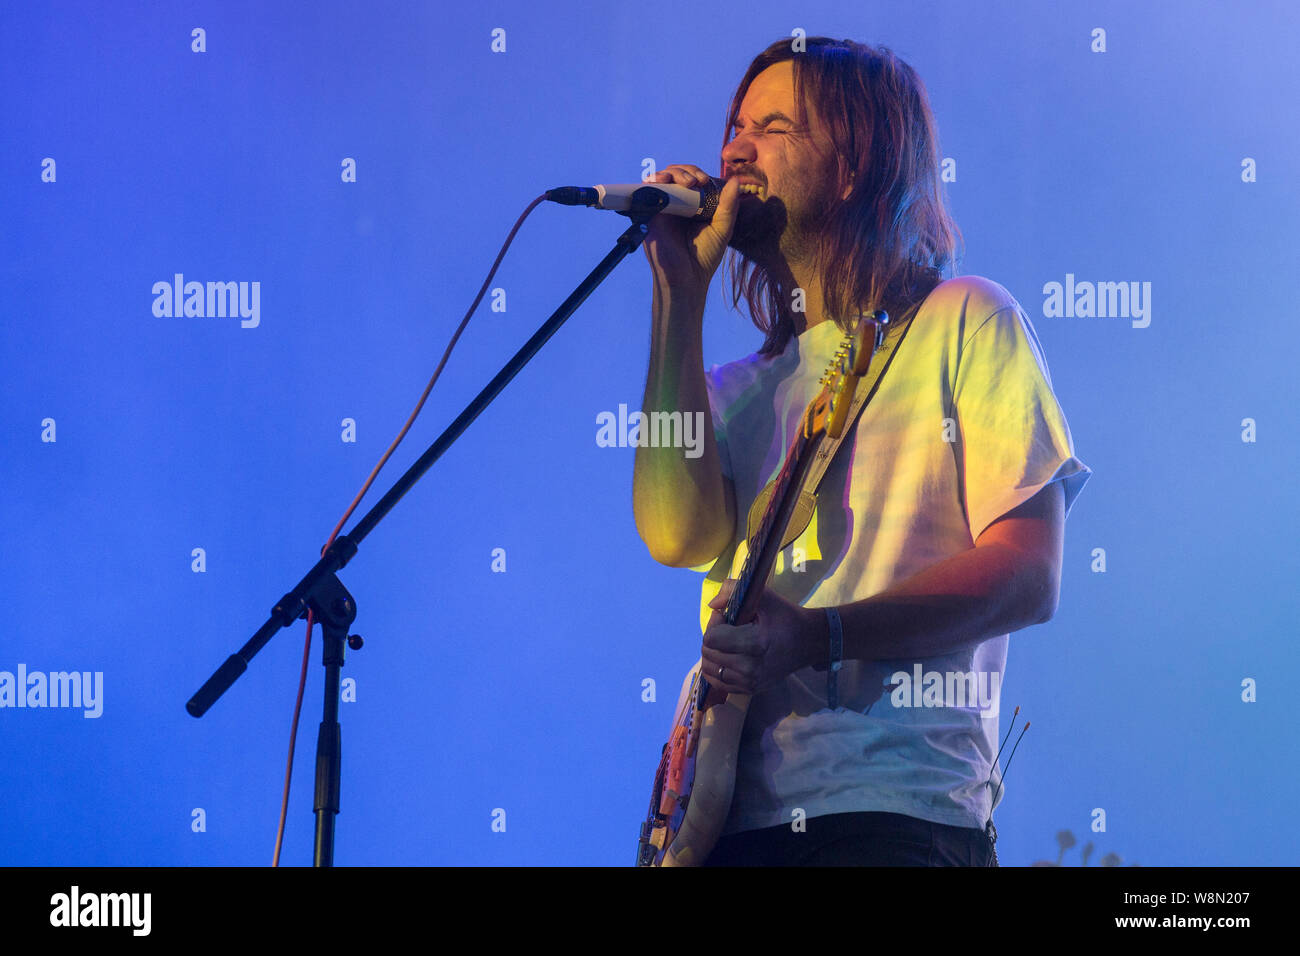 Oslo, Norway. 08th, August 2019. The Australian musical project Tame Impala performs a live concert during the Norwegian music festival Øyafestivalen 2019 in Oslo. Here guitarist and musician Kevin Parker is seen live on stage. (Photo credit: Gonzales Photo - Per-Otto Oppi). Stock Photo